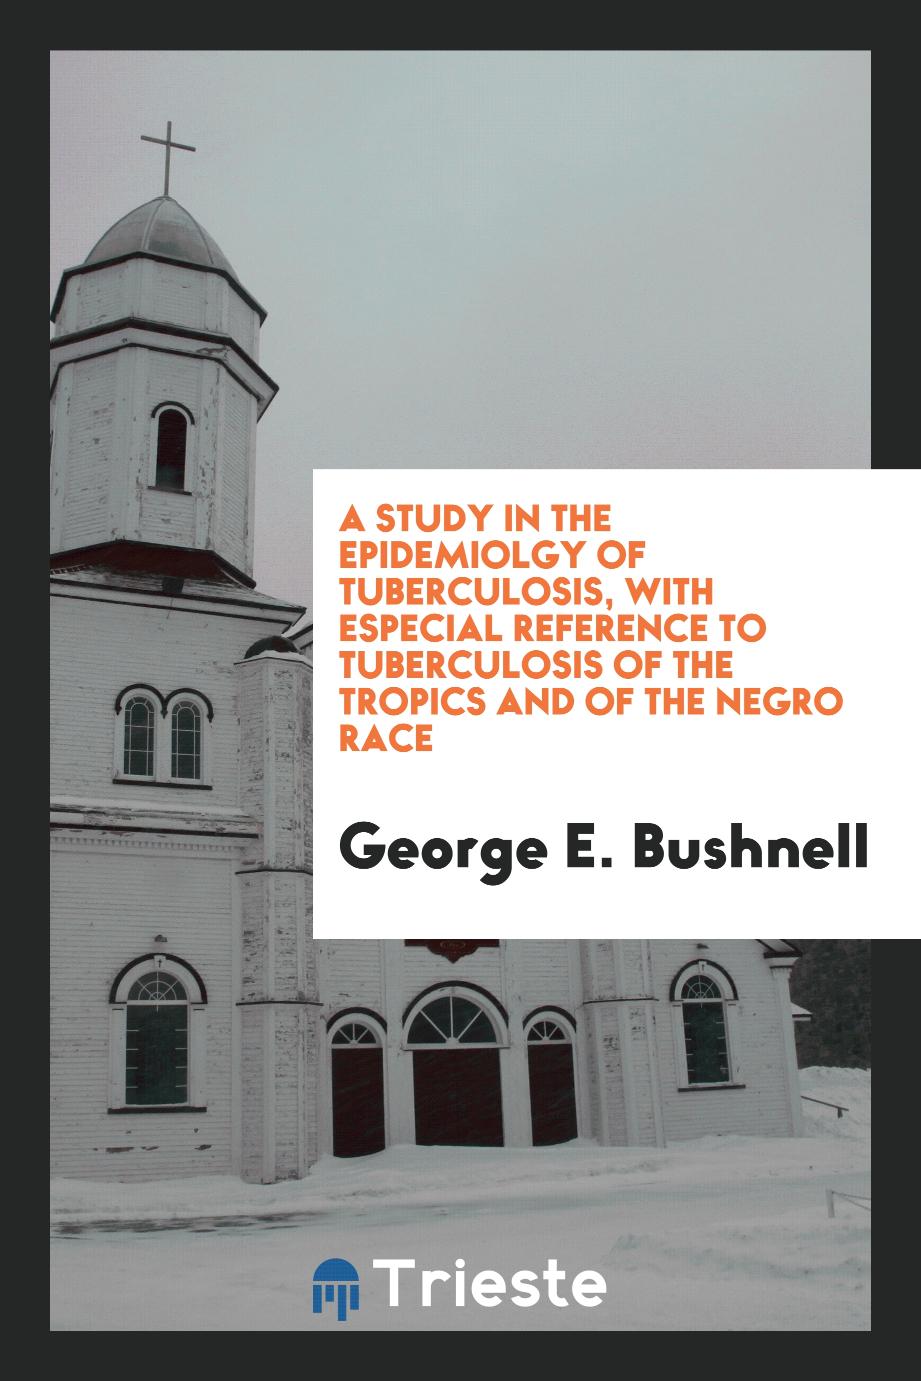 A Study in the Epidemiolgy of Tuberculosis, with Especial Reference to Tuberculosis of the Tropics and of the Negro Race